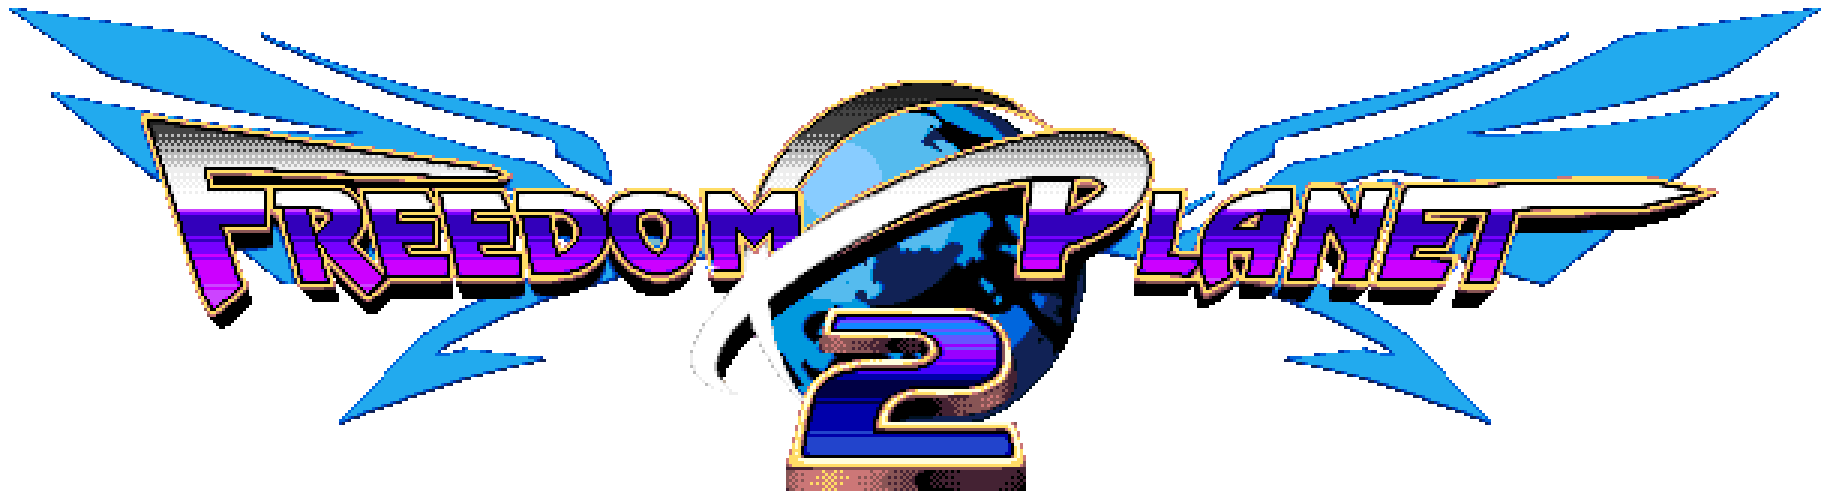 freedom planet 2 release date demo